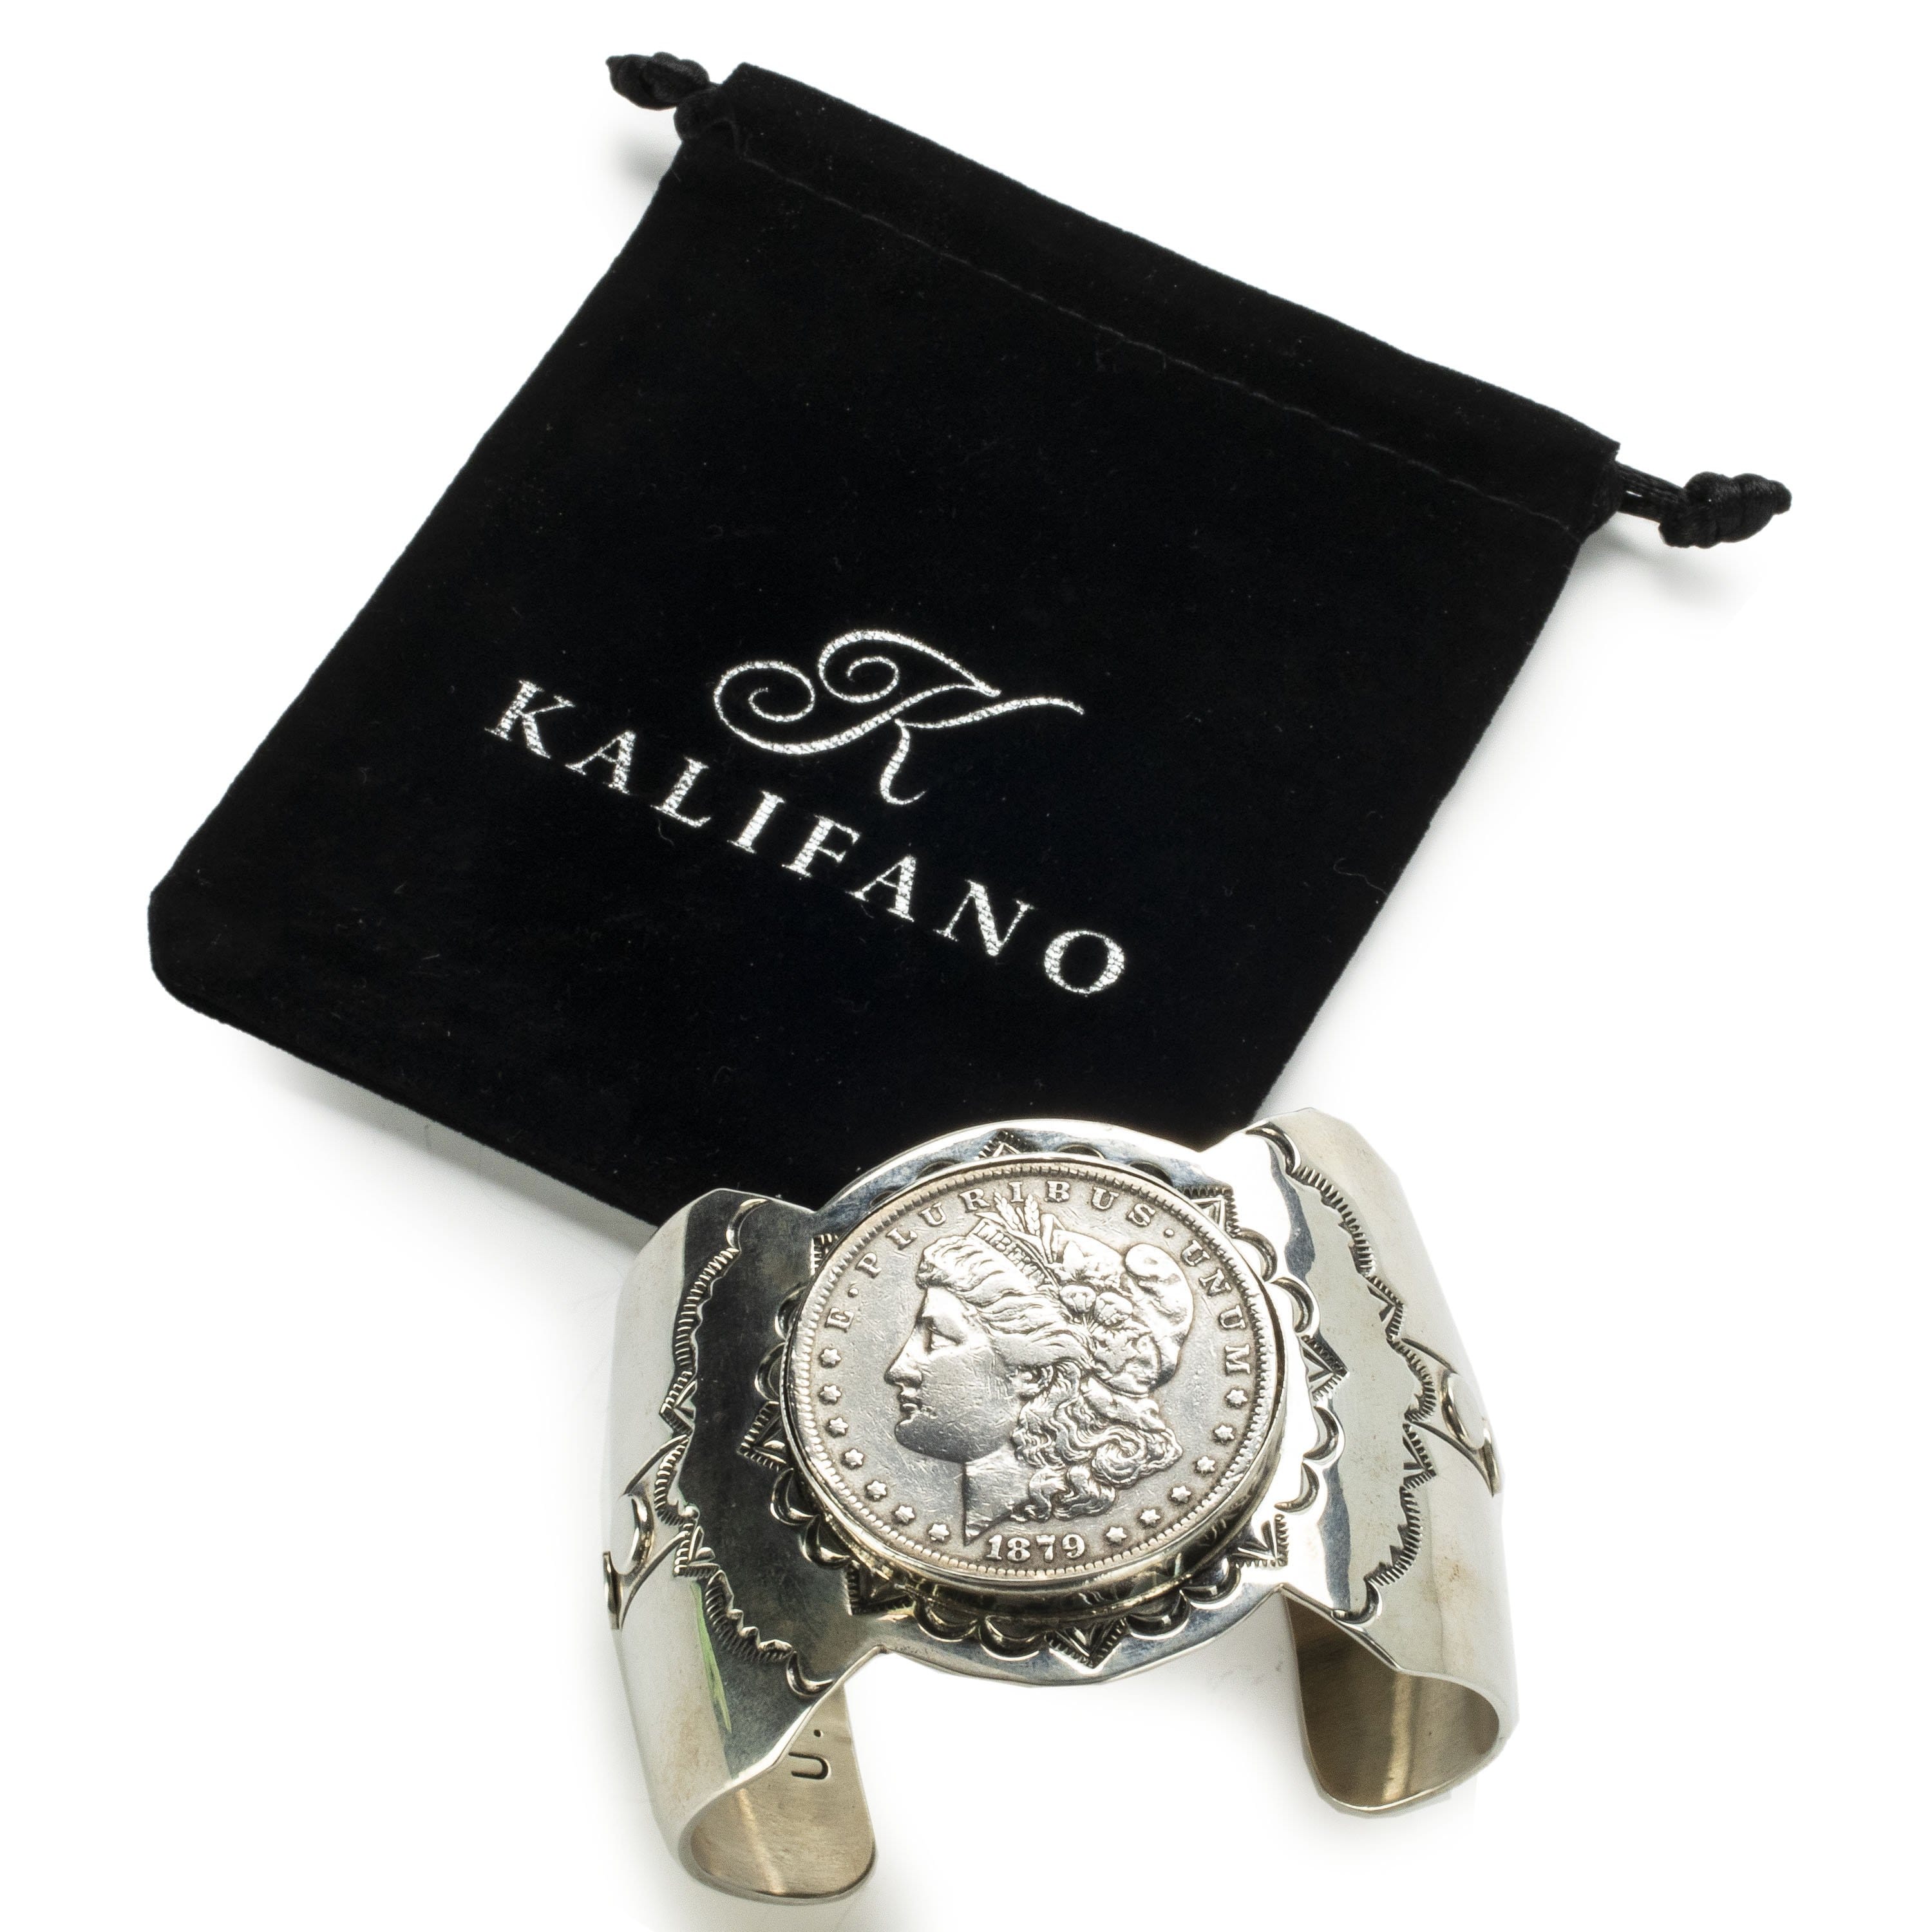 kalifano native american jewelry ronald tom navajo coin usa native american made 925 sterling silver cuff nab2900 008 28590433960130